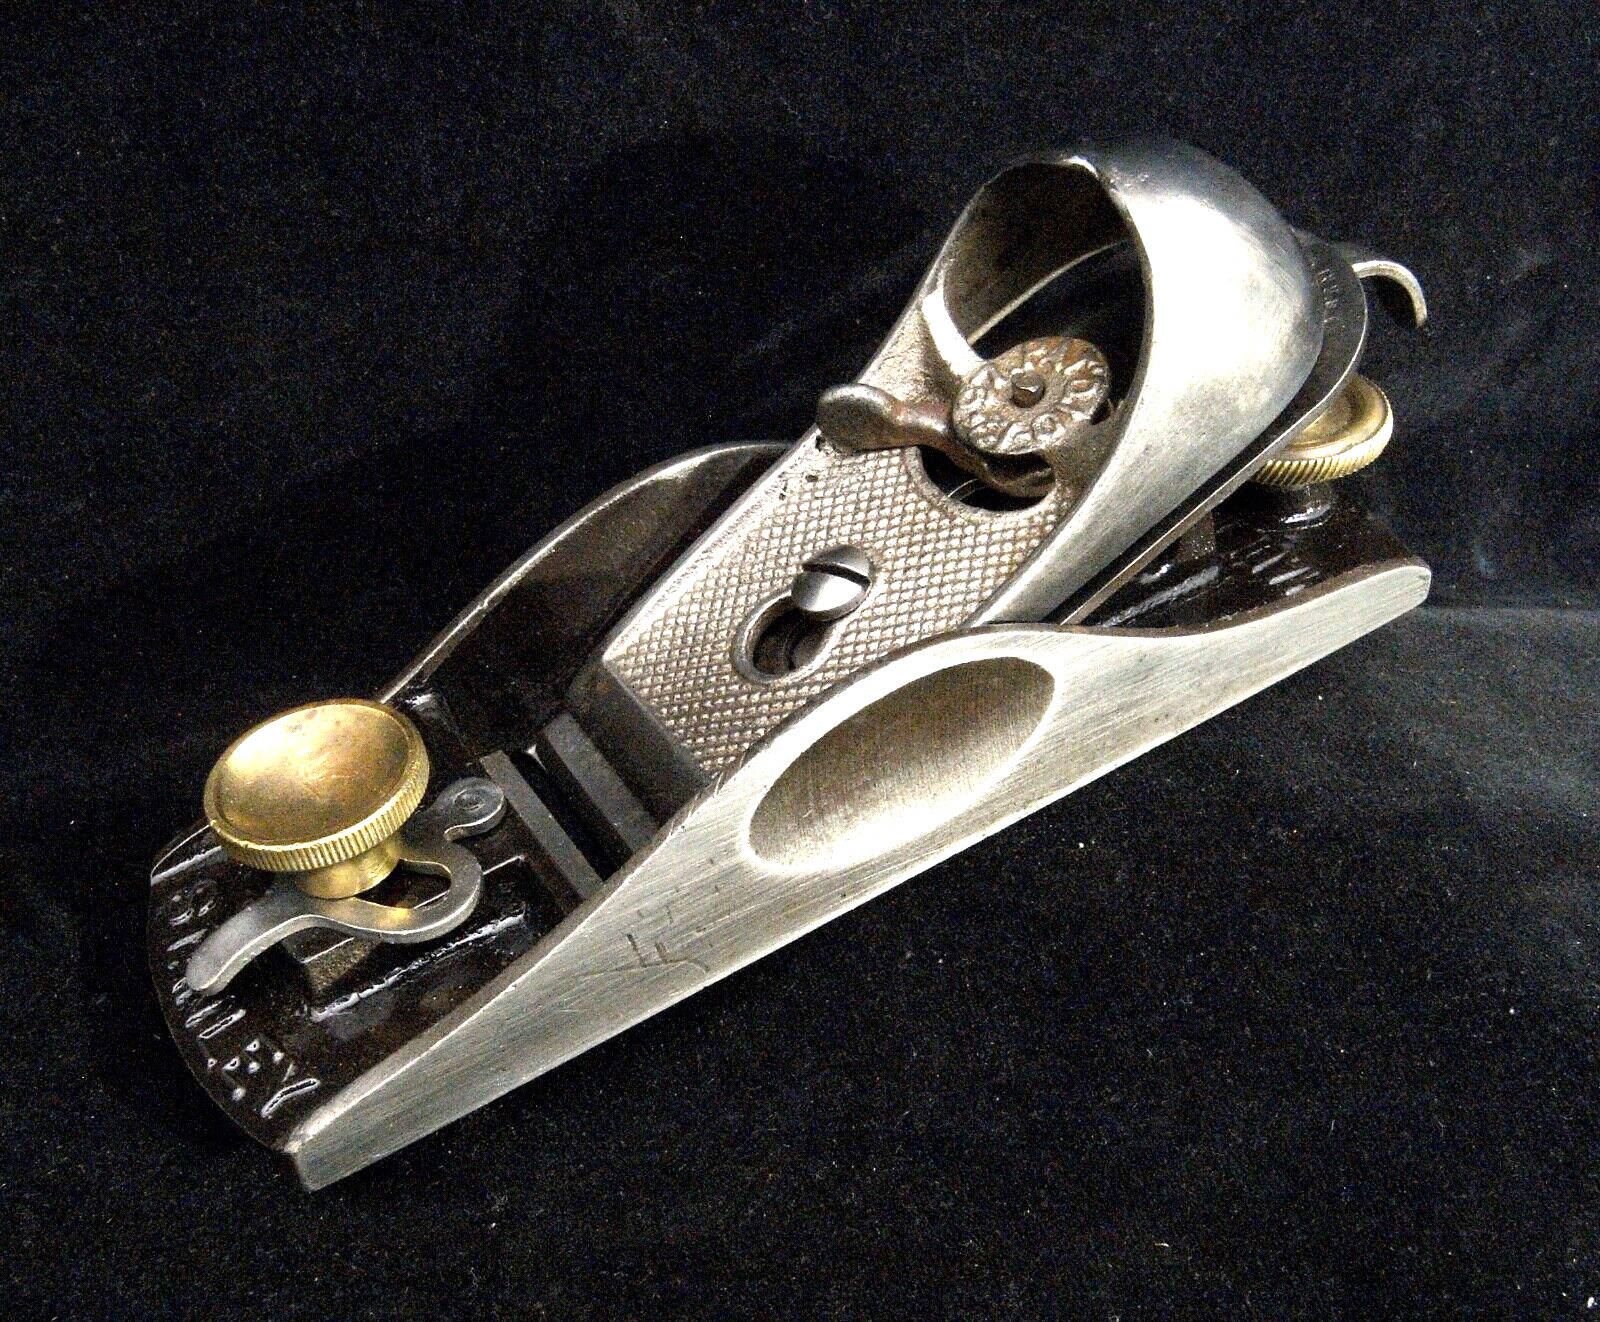 EARLY STANLEY BLOCK PLANE  ( 10/12/97) W/ ADJUSTABLE MOUTH +SWEETHEART CUTTER EX